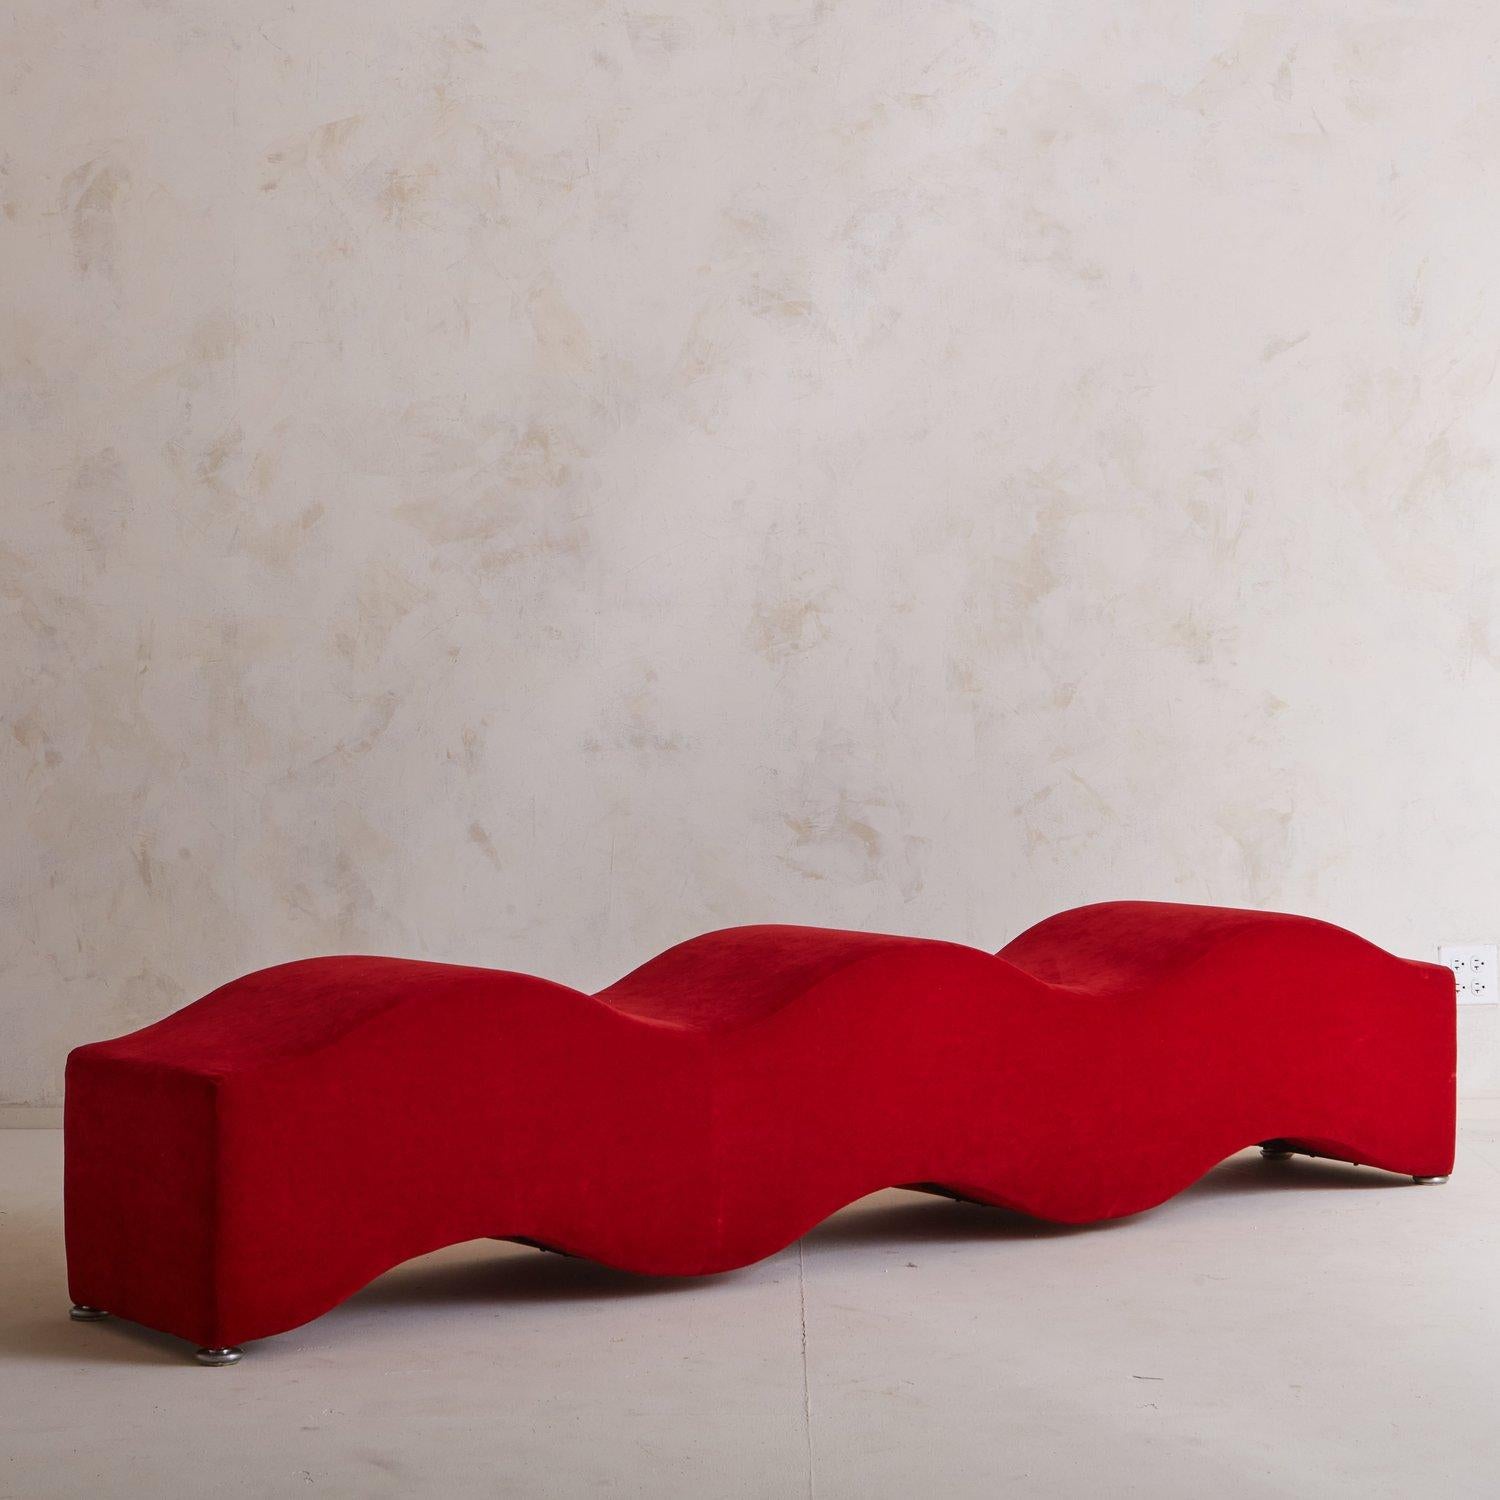 A playful curved bench featuring an organic form and vibrant red upholstery. This statement piece sits on four chrome feet that elevate it just slightly off the ground. Designed by Laurinda Spear for Coalesse. Spear (1950—) is an American architect